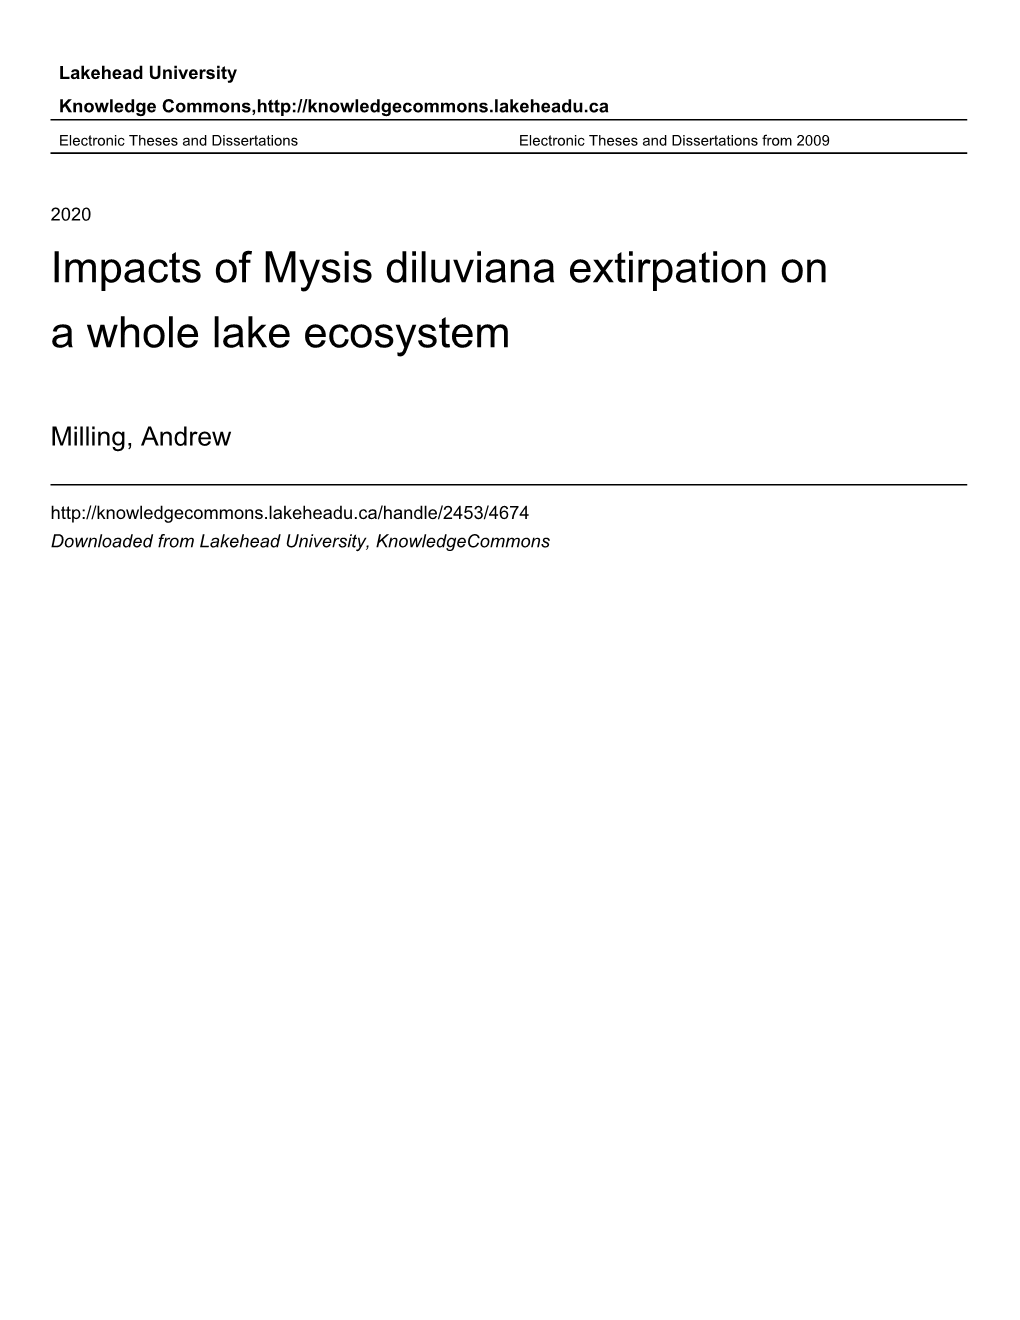 Impacts of Mysis Diluviana Extirpation on a Whole Lake Ecosystem